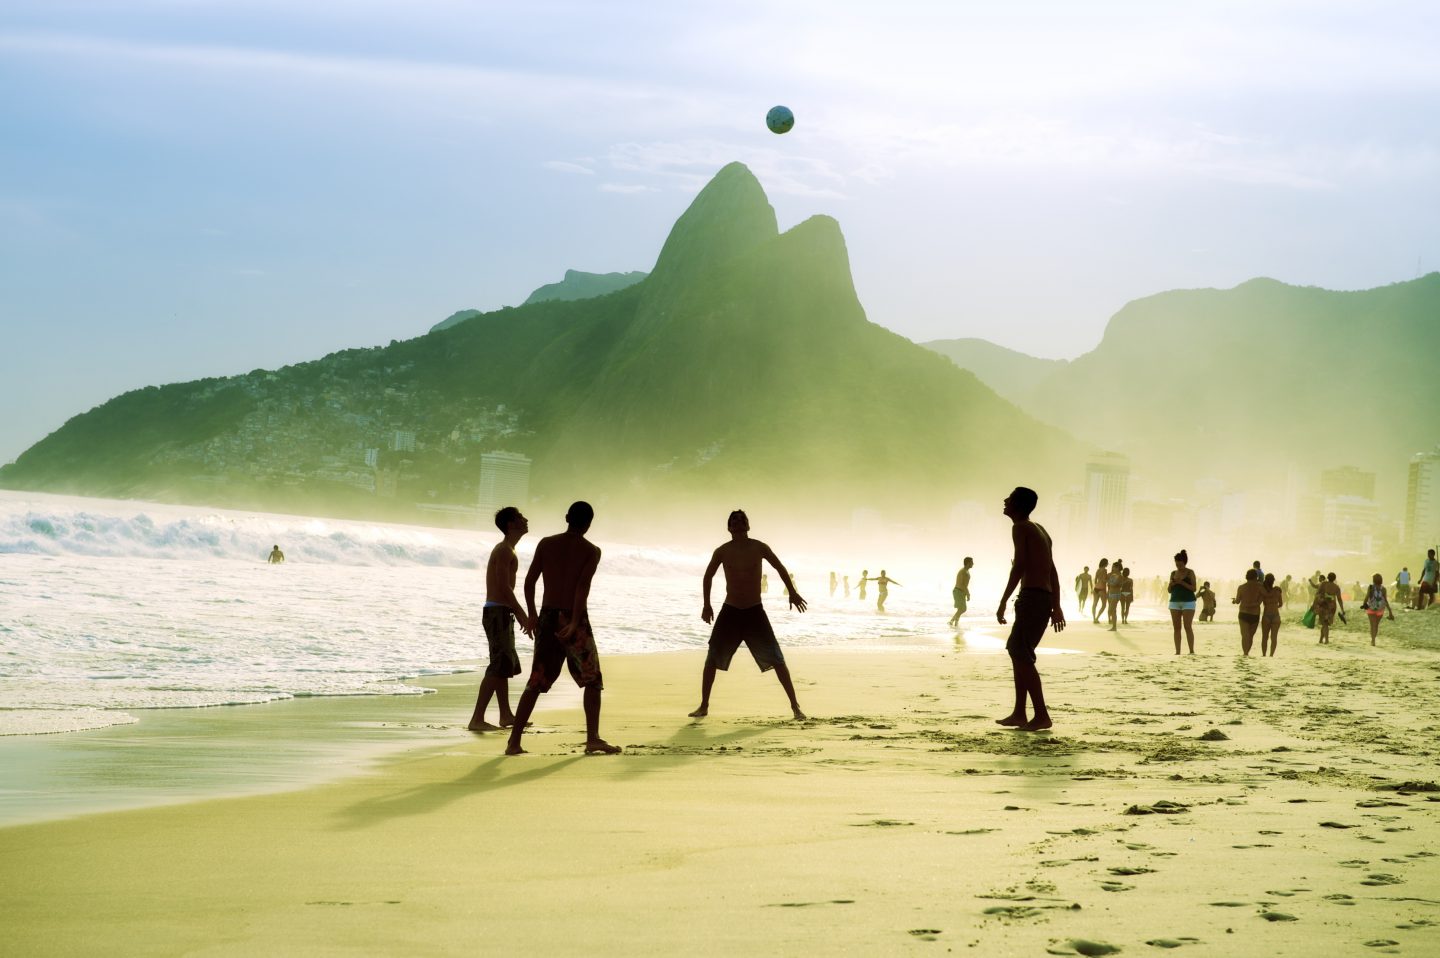 Catch the locals playing football at the beaches of Rio de Janeiro